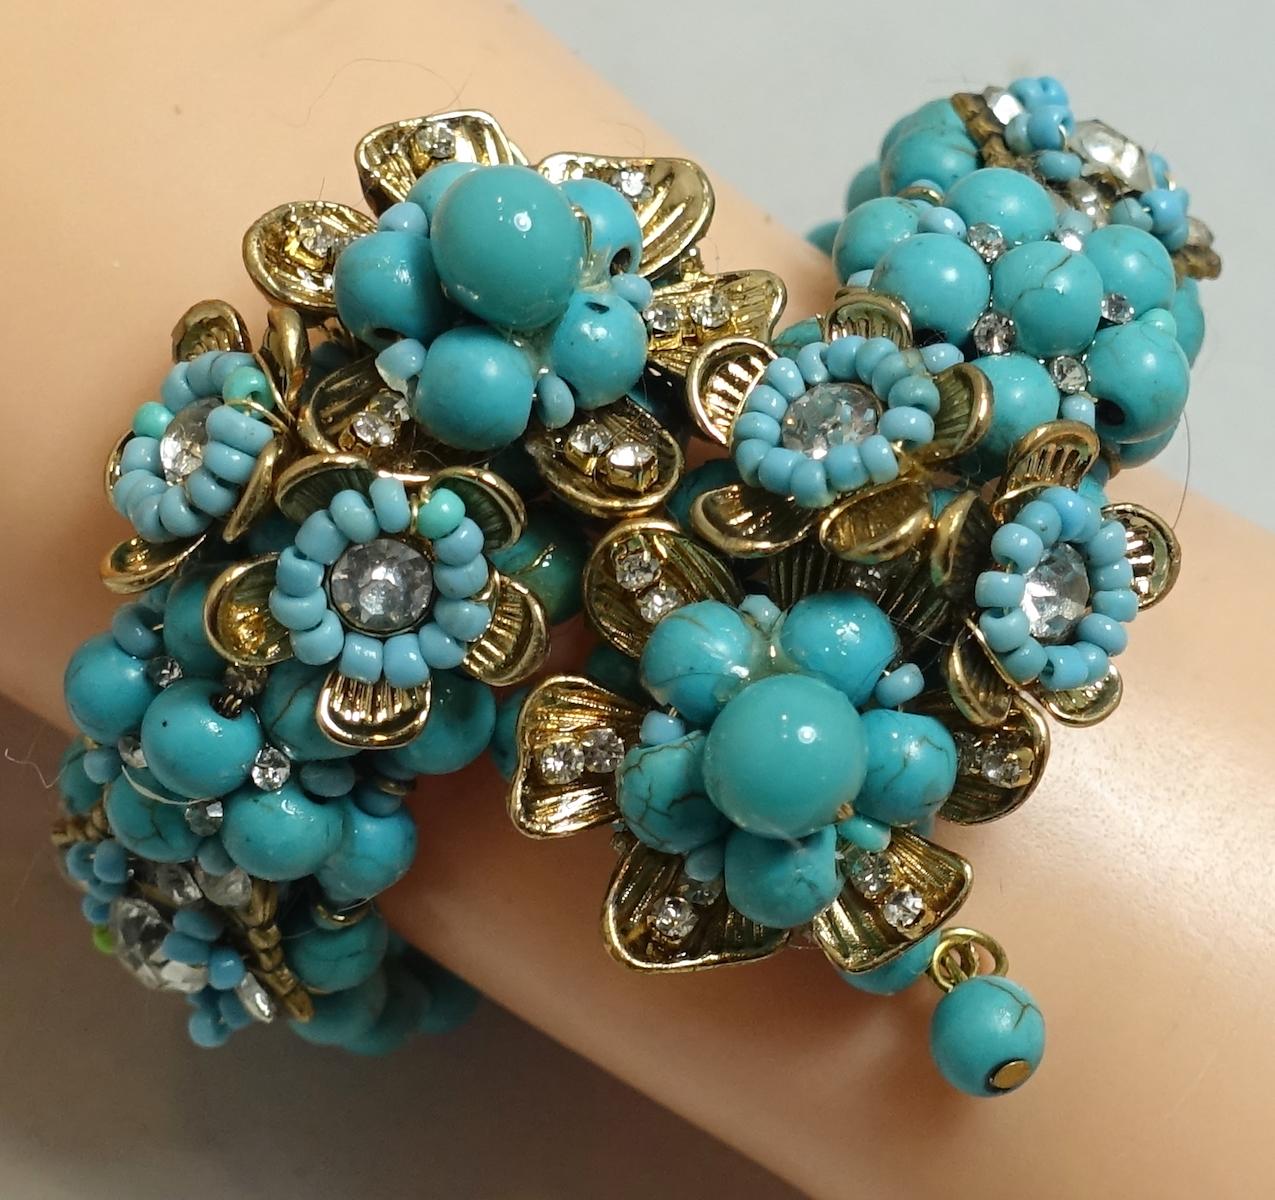 We believe this is a Miriam Haskell vintage wrap bracelet with burgundy glass beads in the center with clear crystals in a floral design. This wrap bracelet is in a gold tone setting and measure 9” around the inside. The centerpiece is 1” wide and